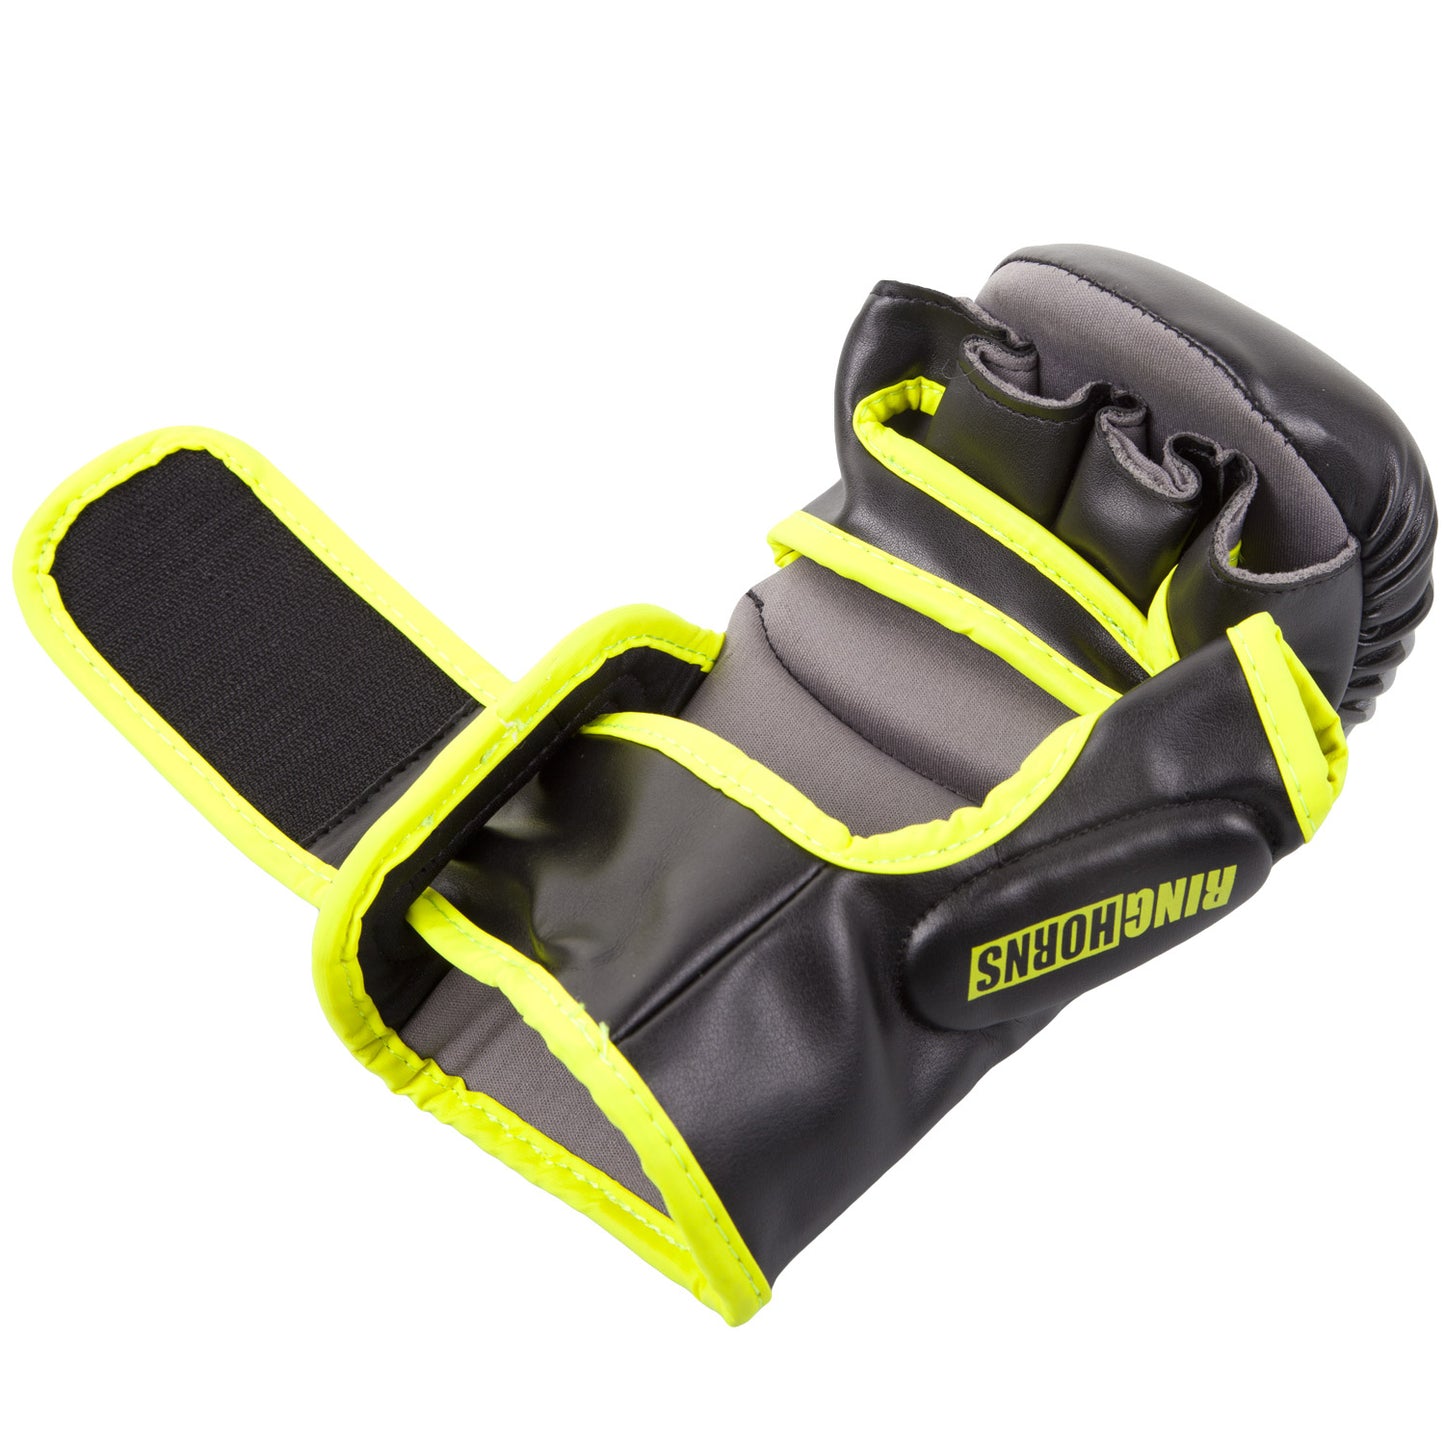 Ringhorns Charger Sparring Gloves - Black/Neo Yellow